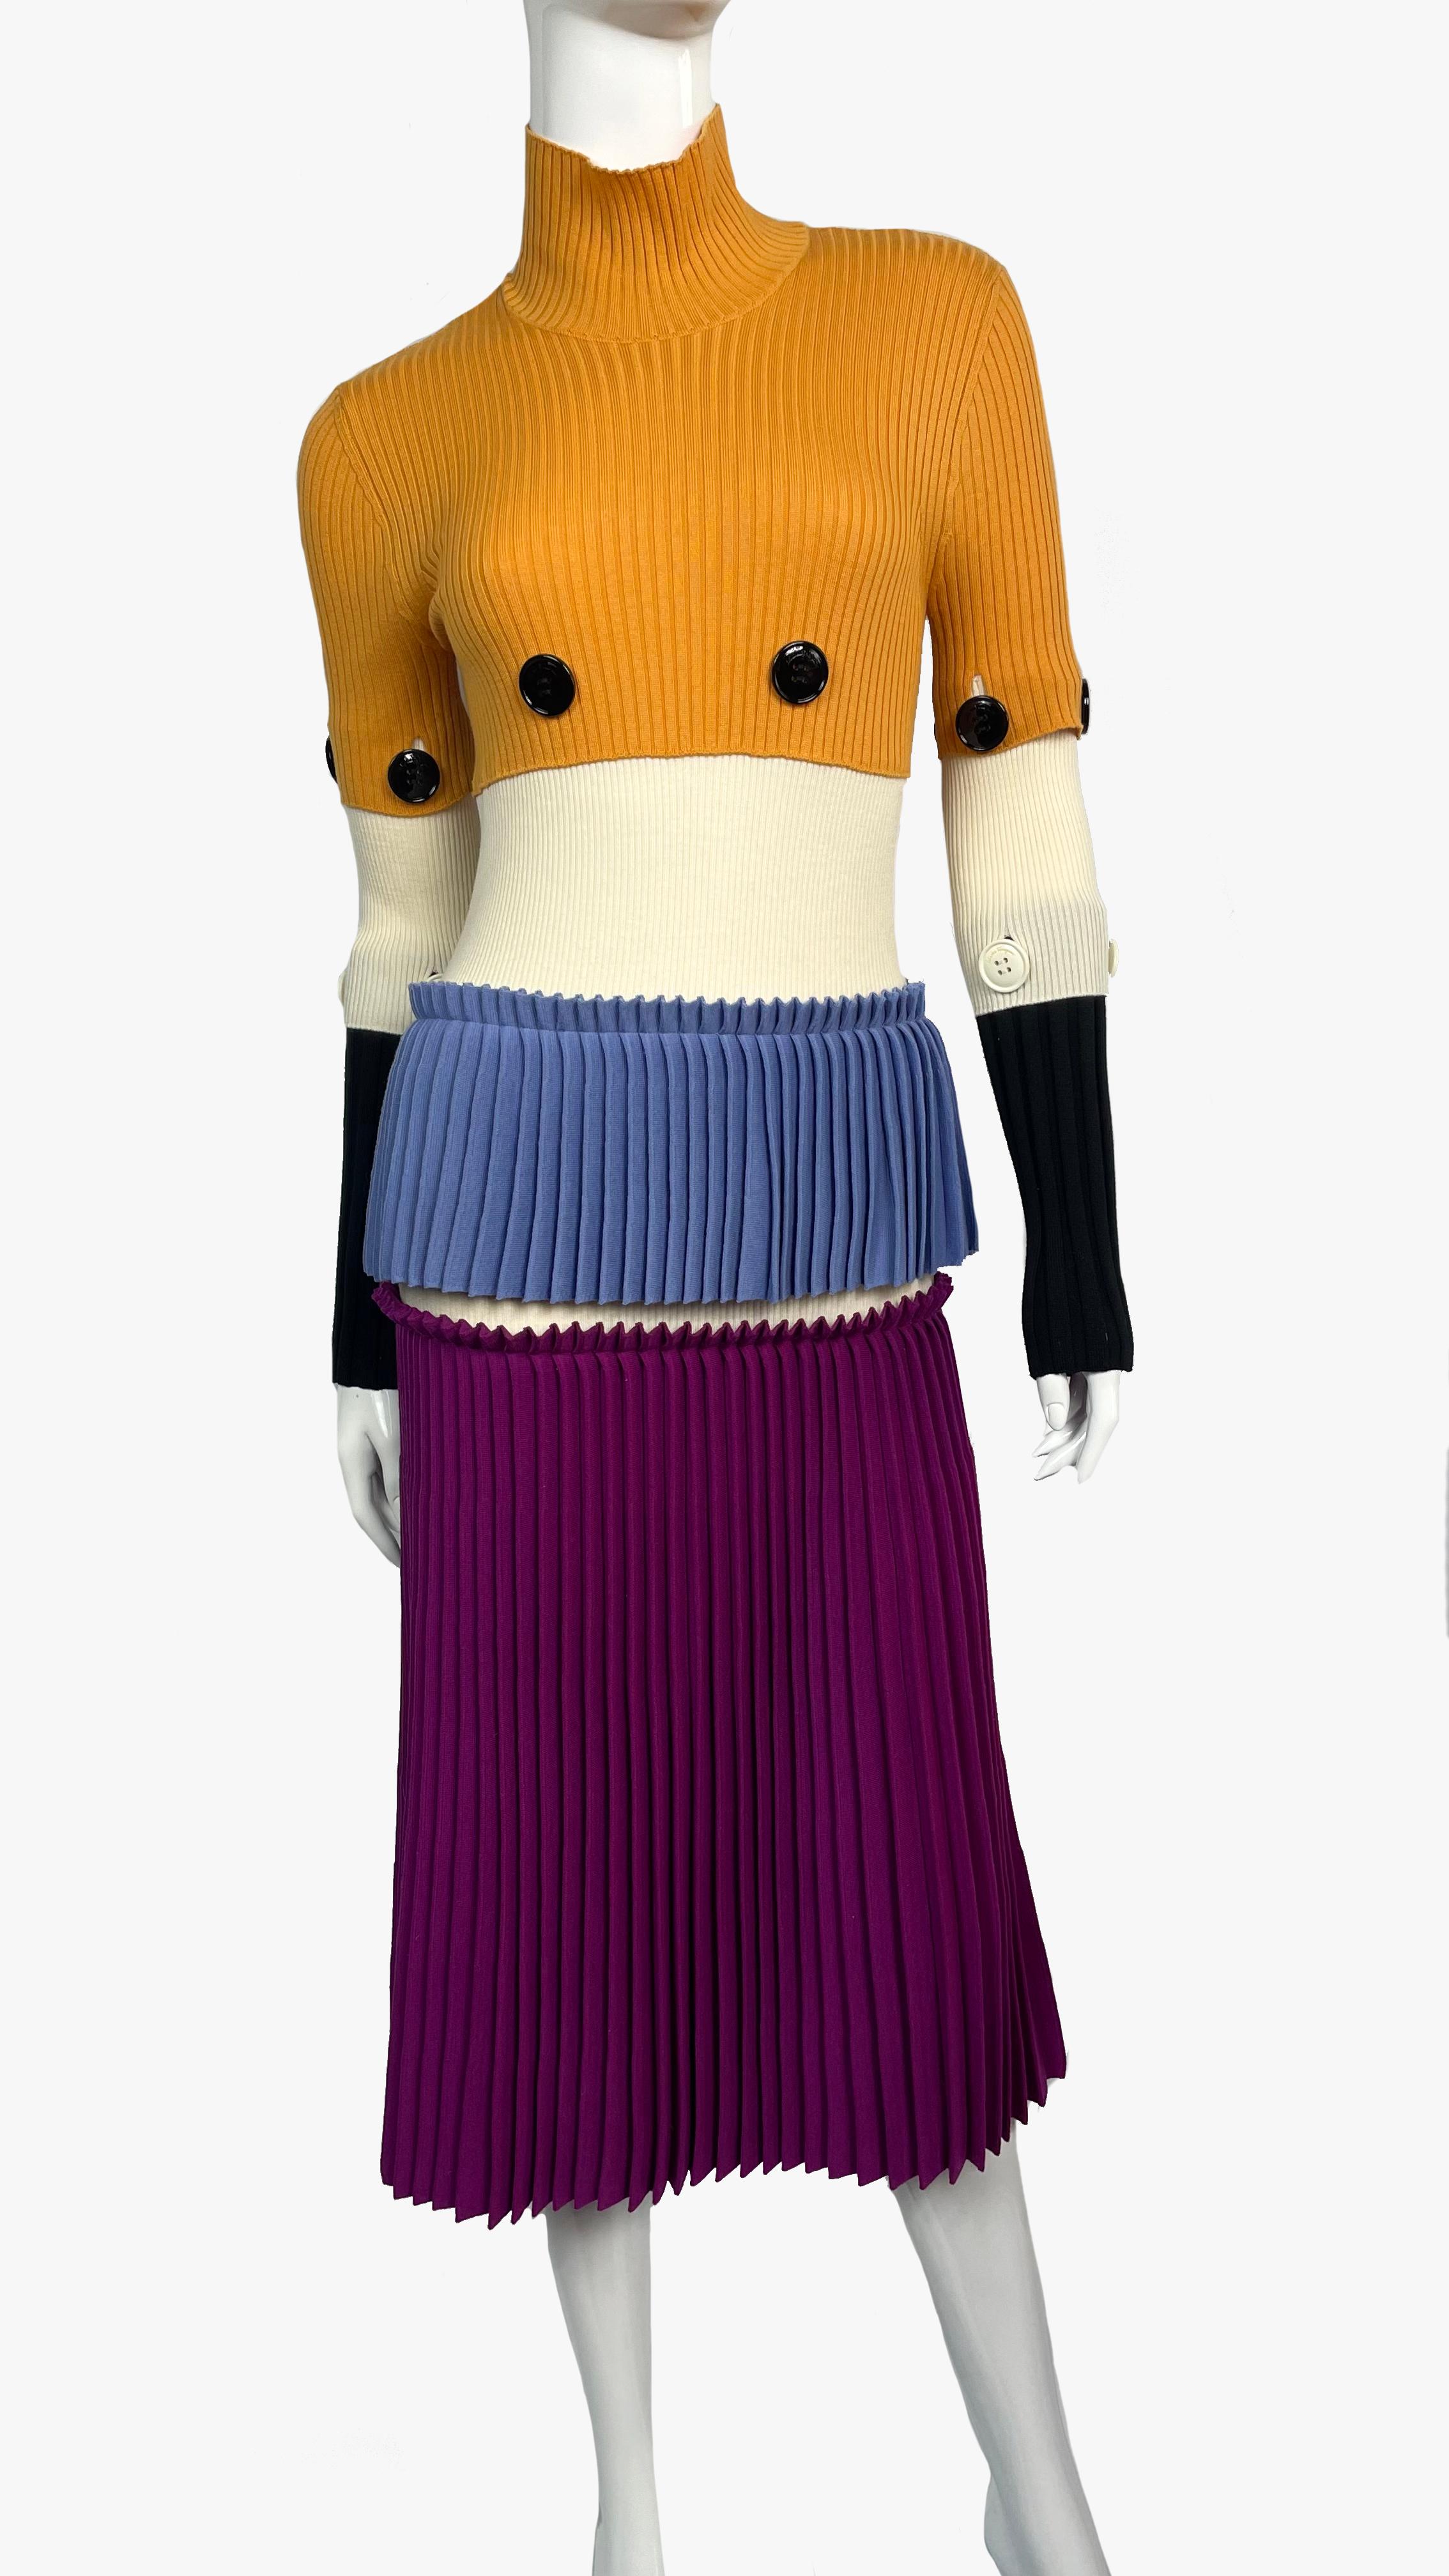 Runway Salvatore Ferragamo tiered pleated dress with yellow, blue, white and purple layers. Accented with black and white buttons. 
Fall-Winter Ready-to-Wear Collection 2016. 
Sleeves are fastened with buttons
Size: S
Composition: 100% virgin wool
